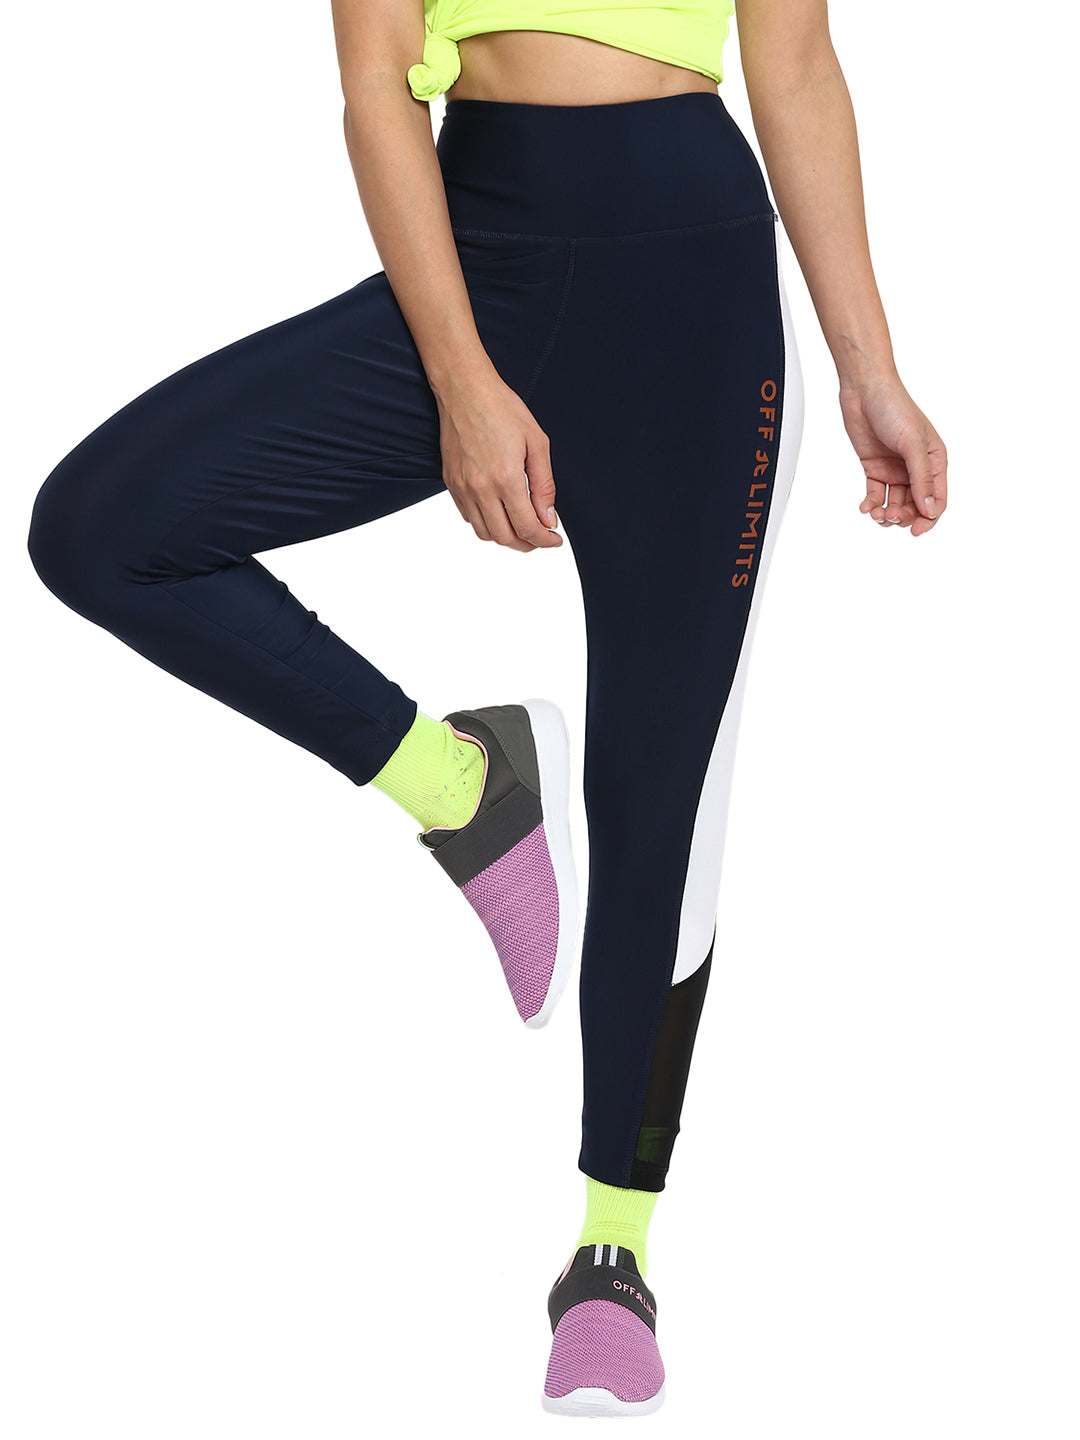 WORKOUT MESH TIGHTS Women Tights